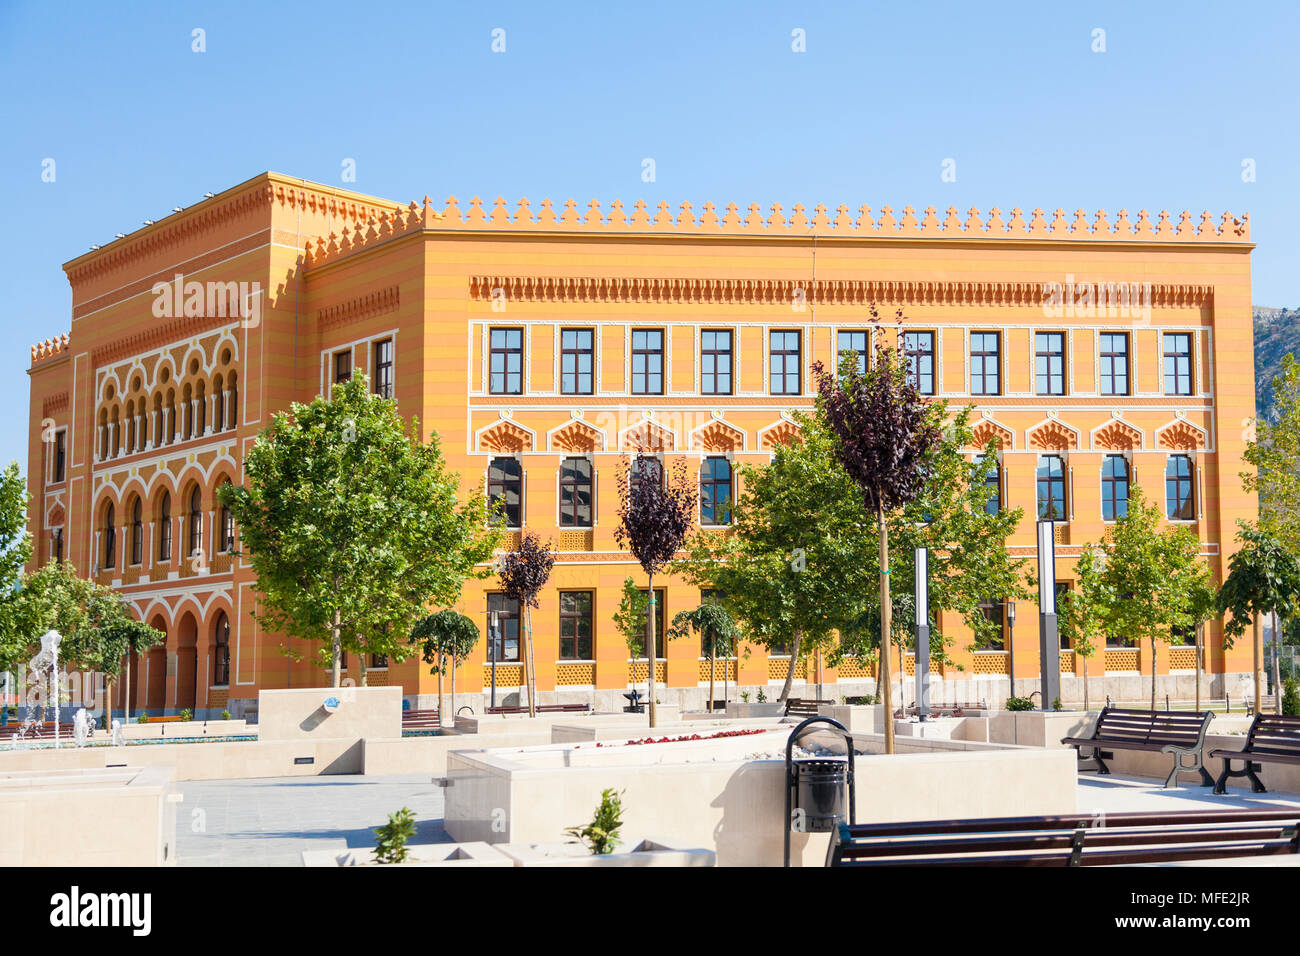 The United World College in Mostar, Bosnia and Herzegovina Stock Photo